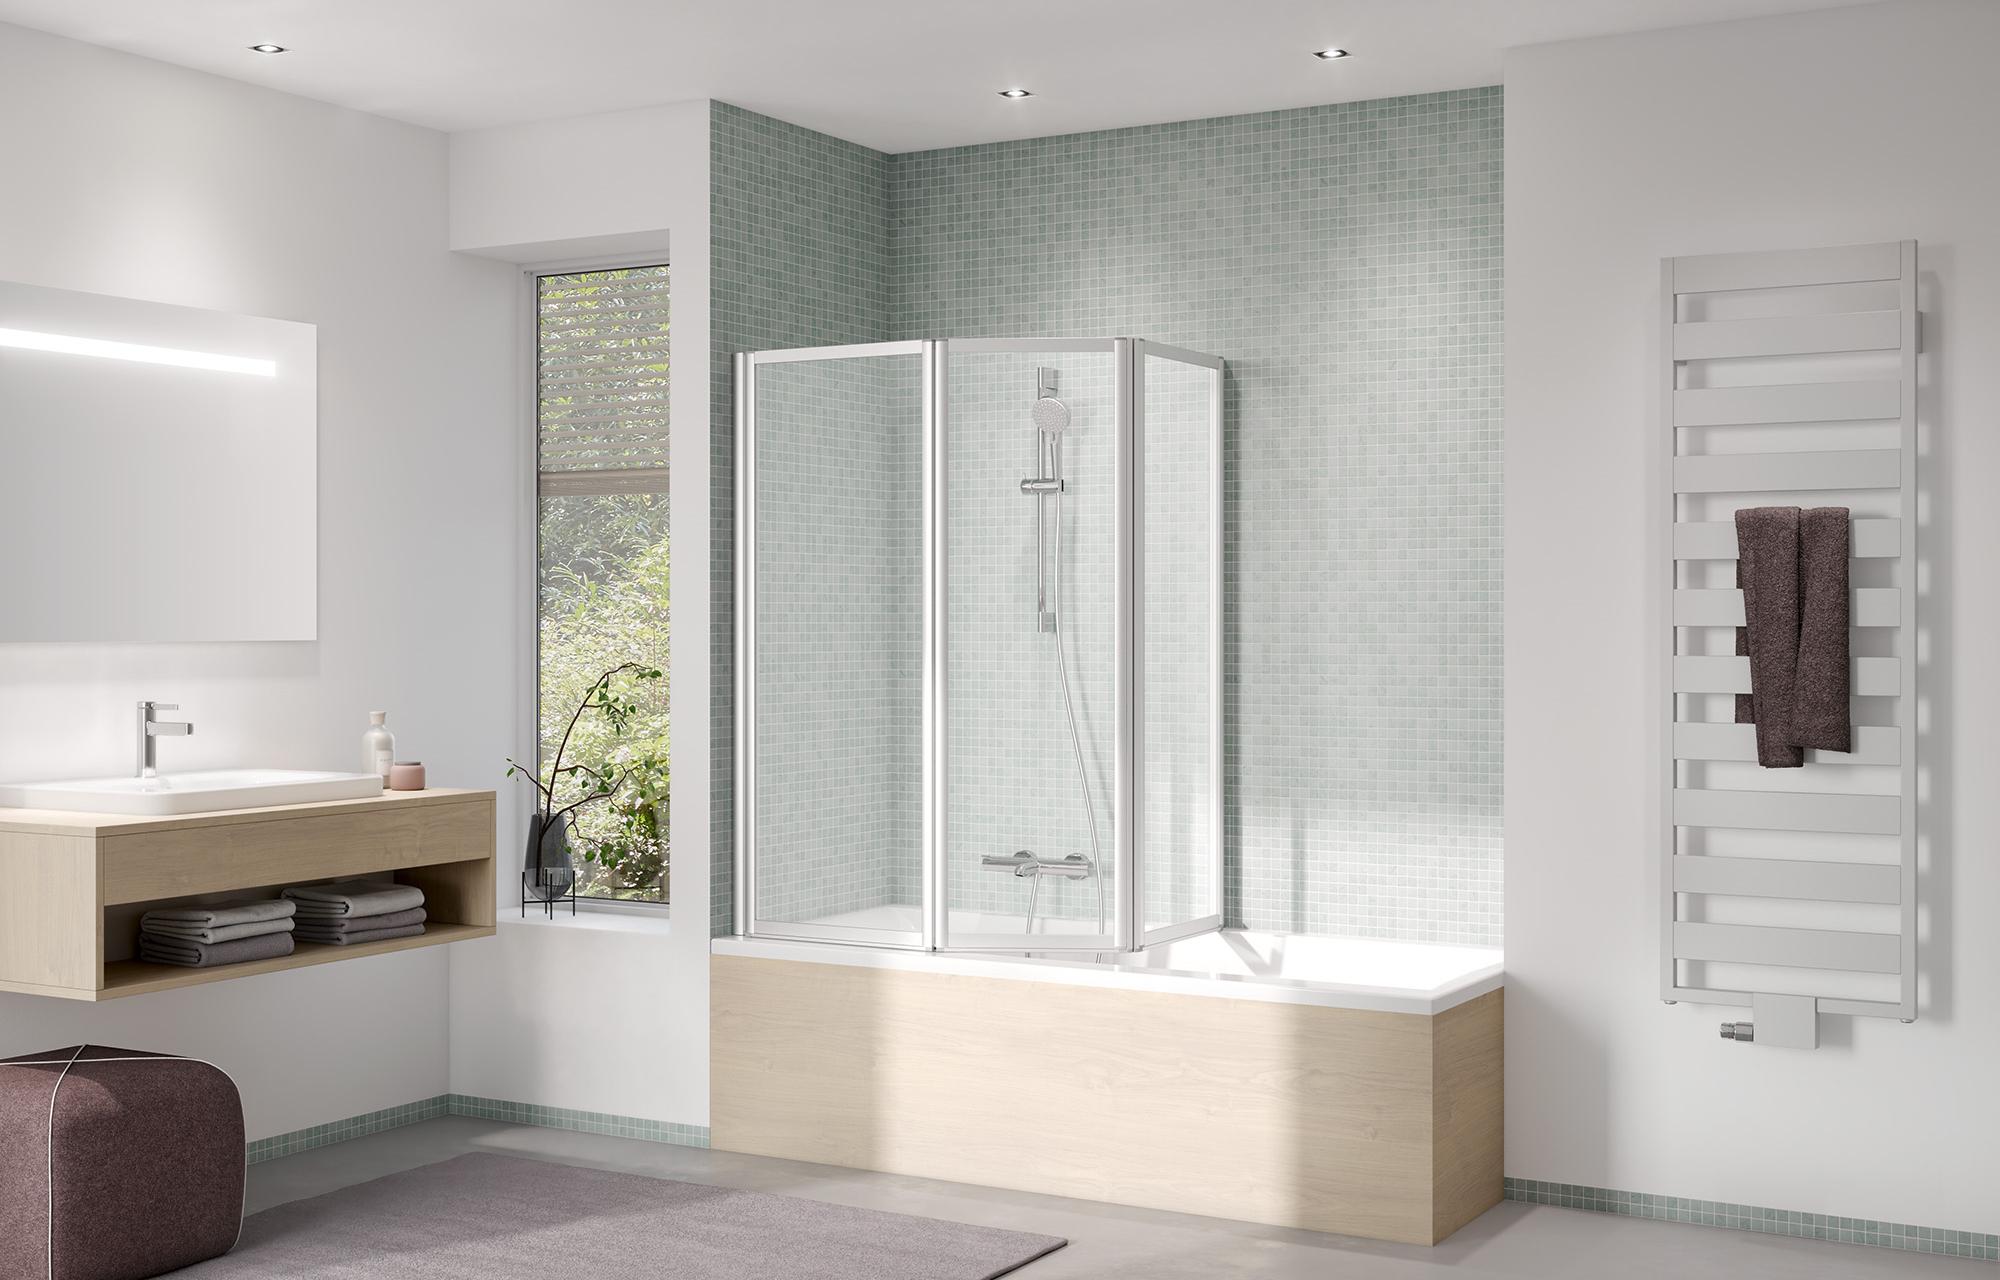 Kermi shower enclosure, VARIO 2000 two and one-panel folding screen with magnetic closure on bathtub